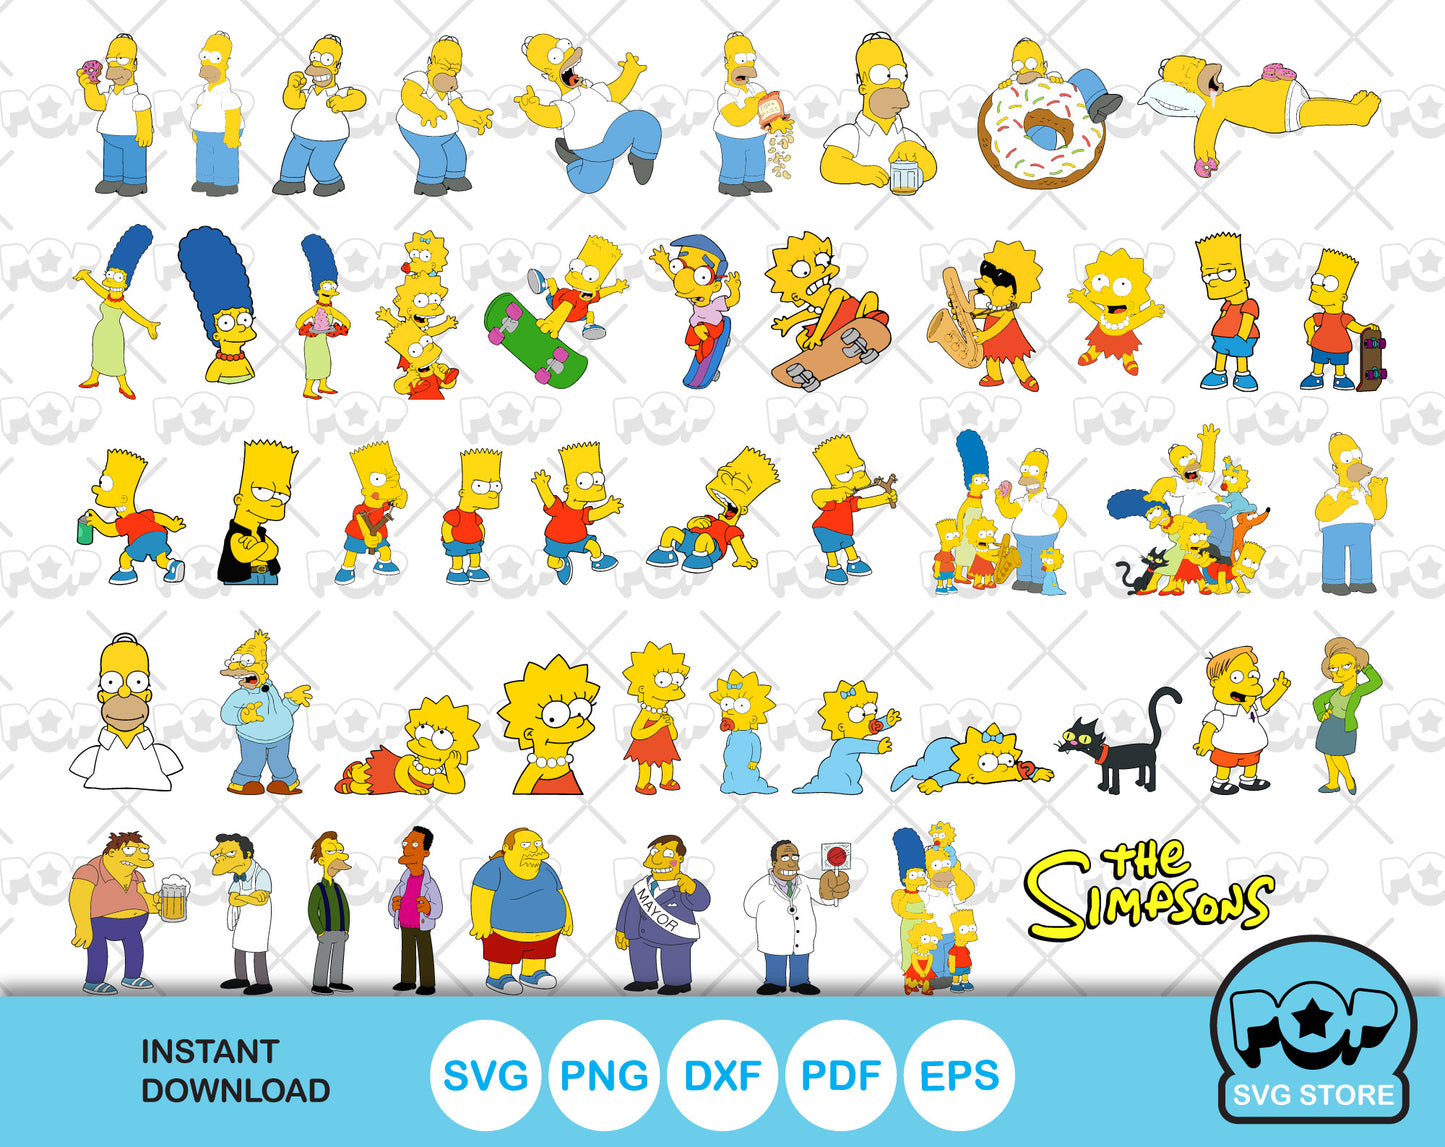 The Simpsons clipart bundle, The Simpsons SVG cutting files for Cricut / Silhouette, instant download